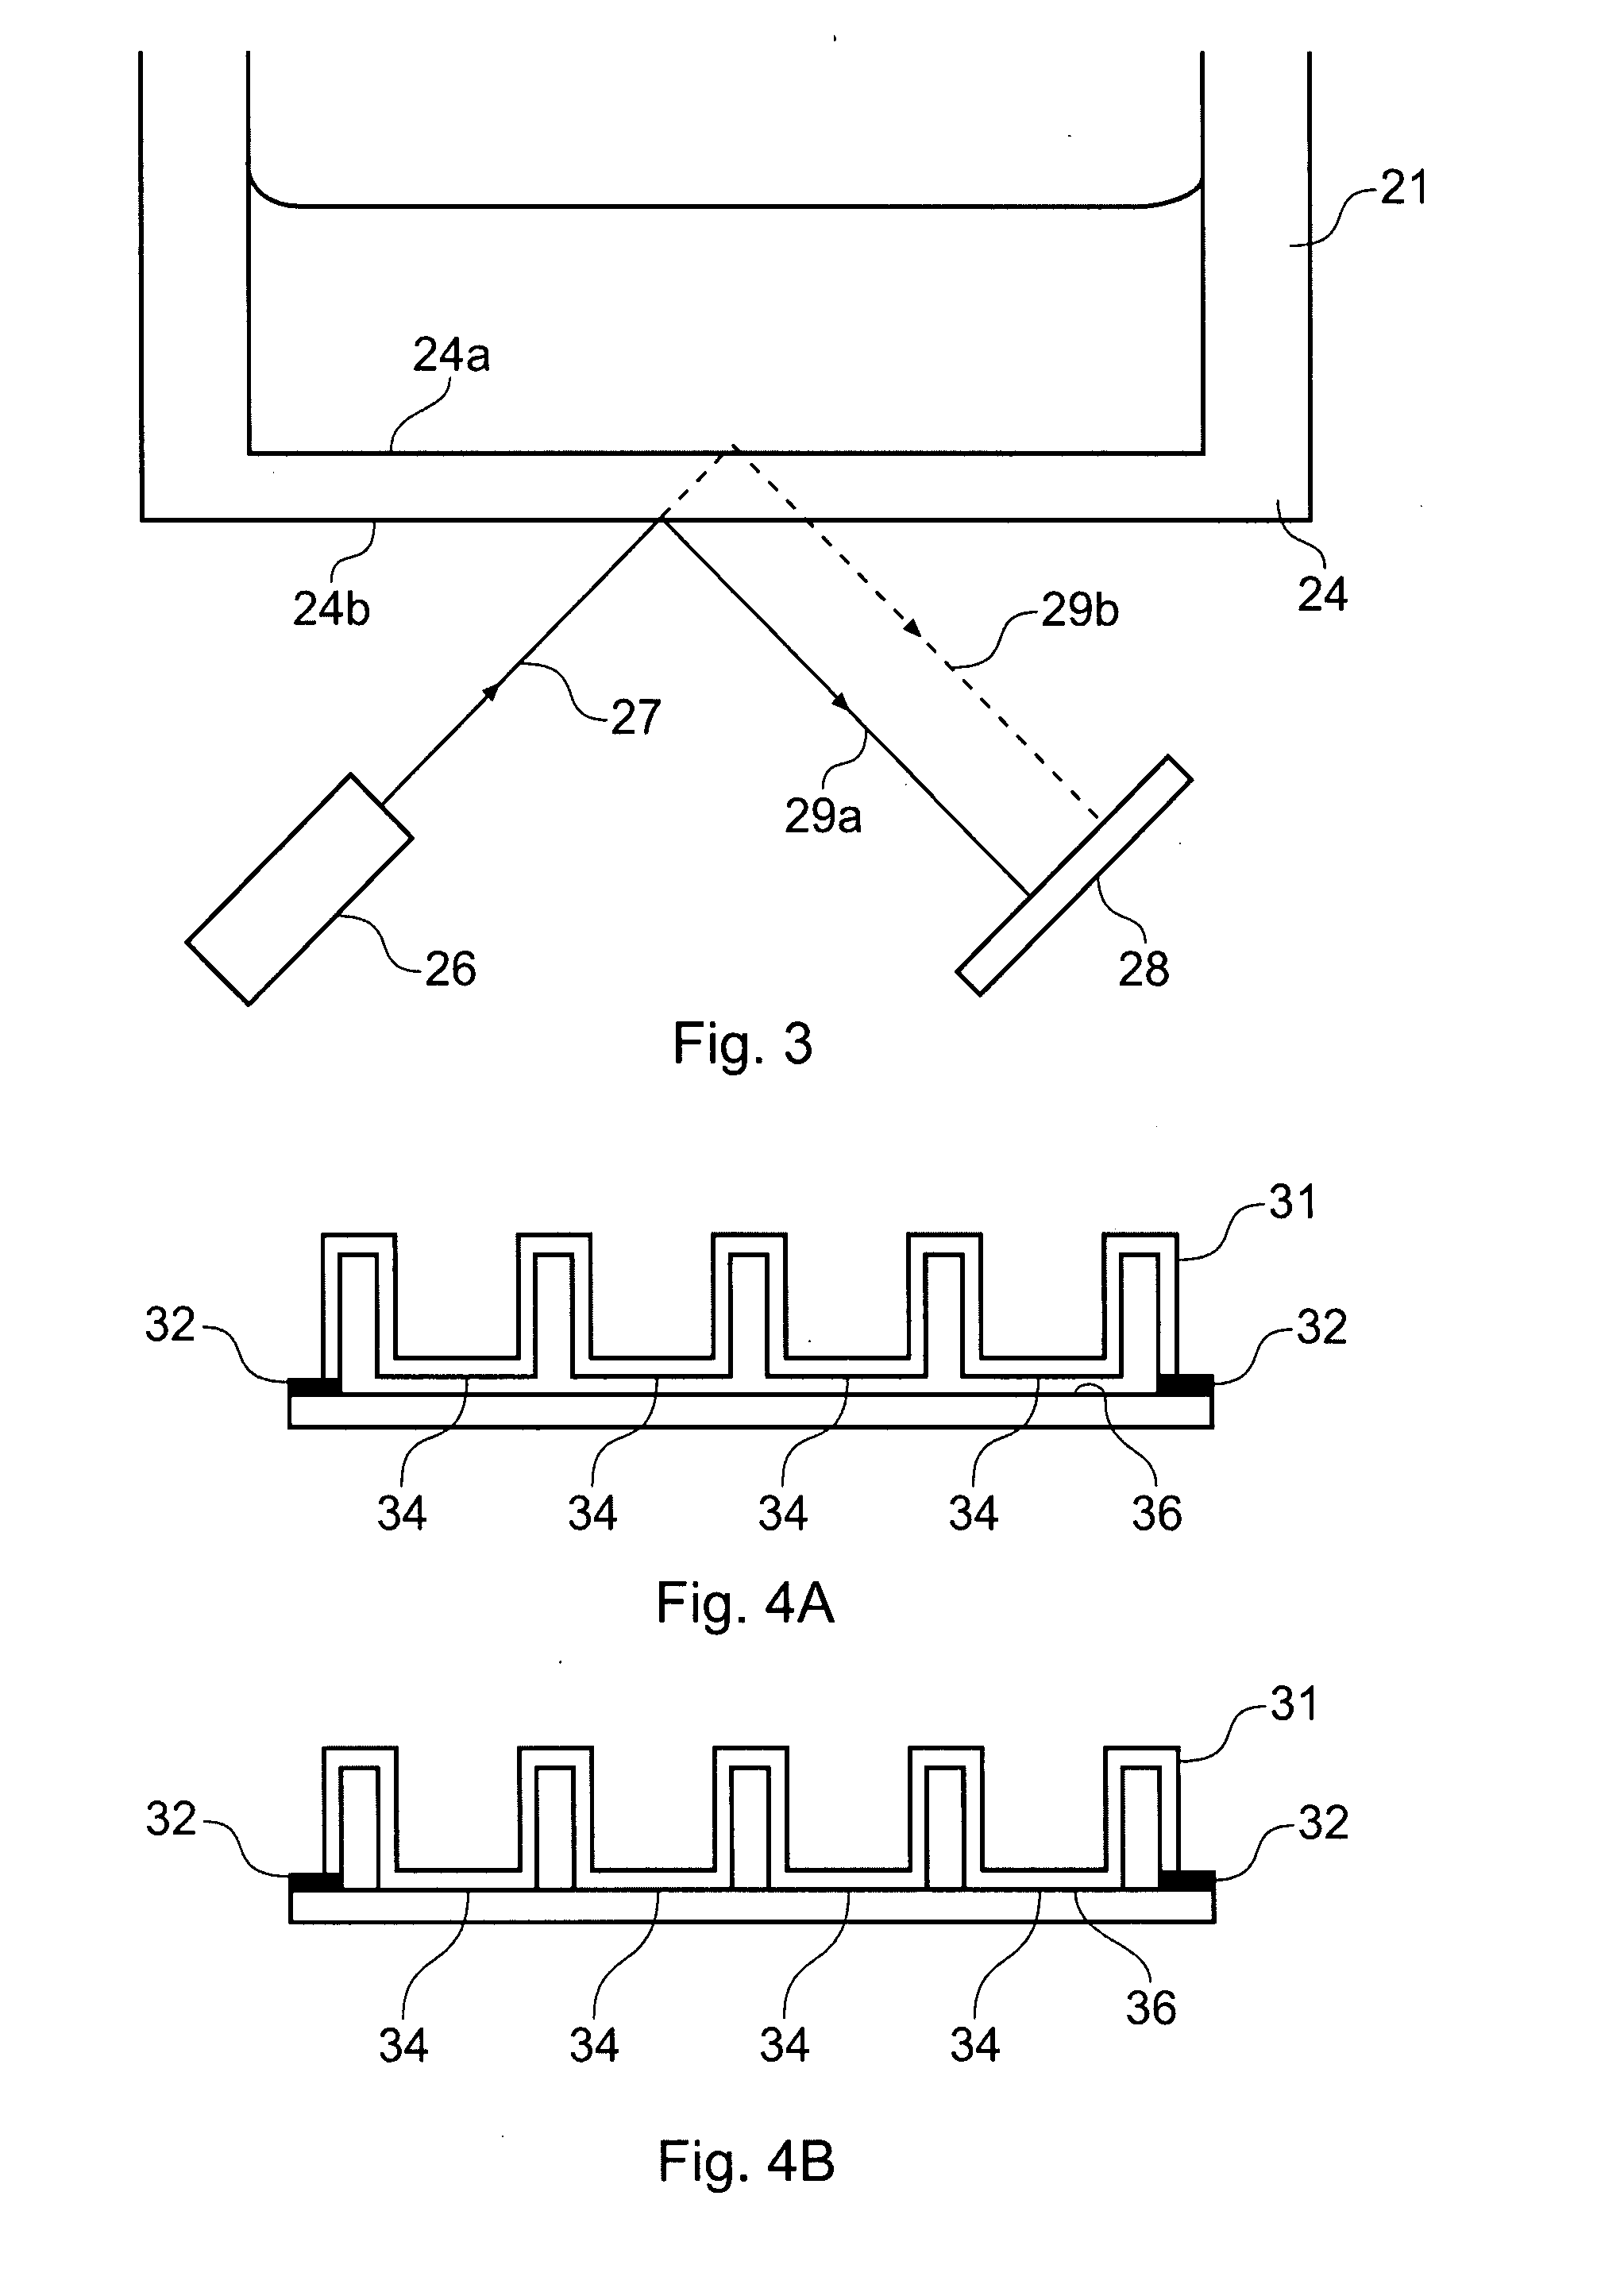 Methods and apparatus for optical analysis of samples in biological sample containers